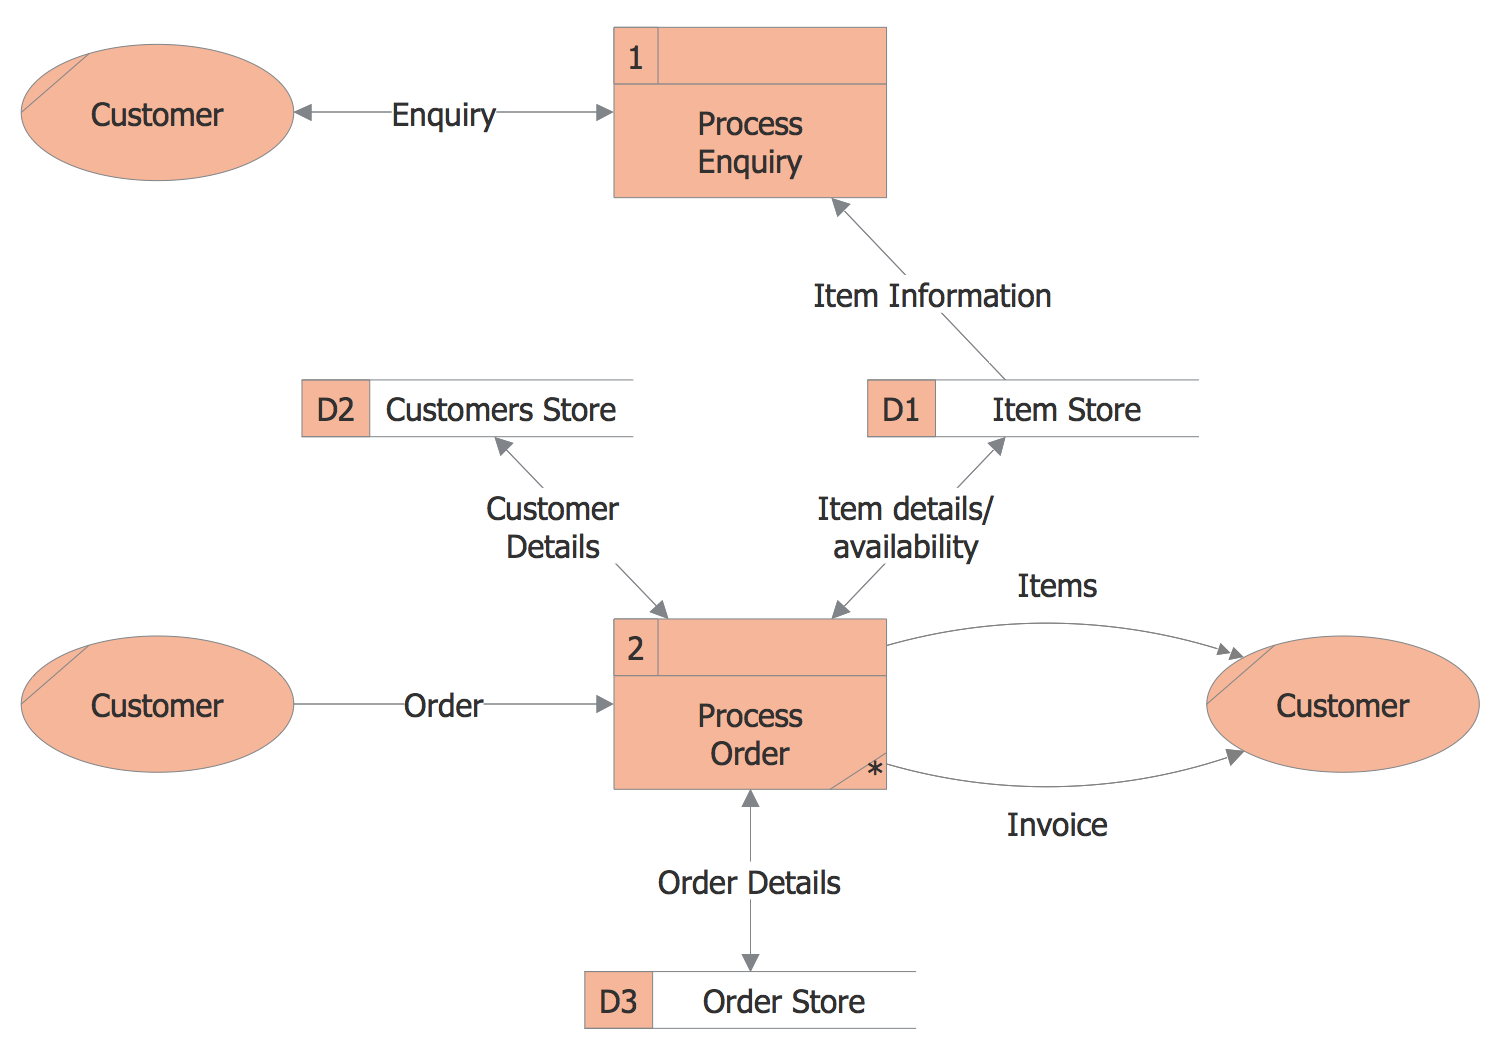 Classic Business Process Modeling Solution | ConceptDraw.com structural diagram in uml 